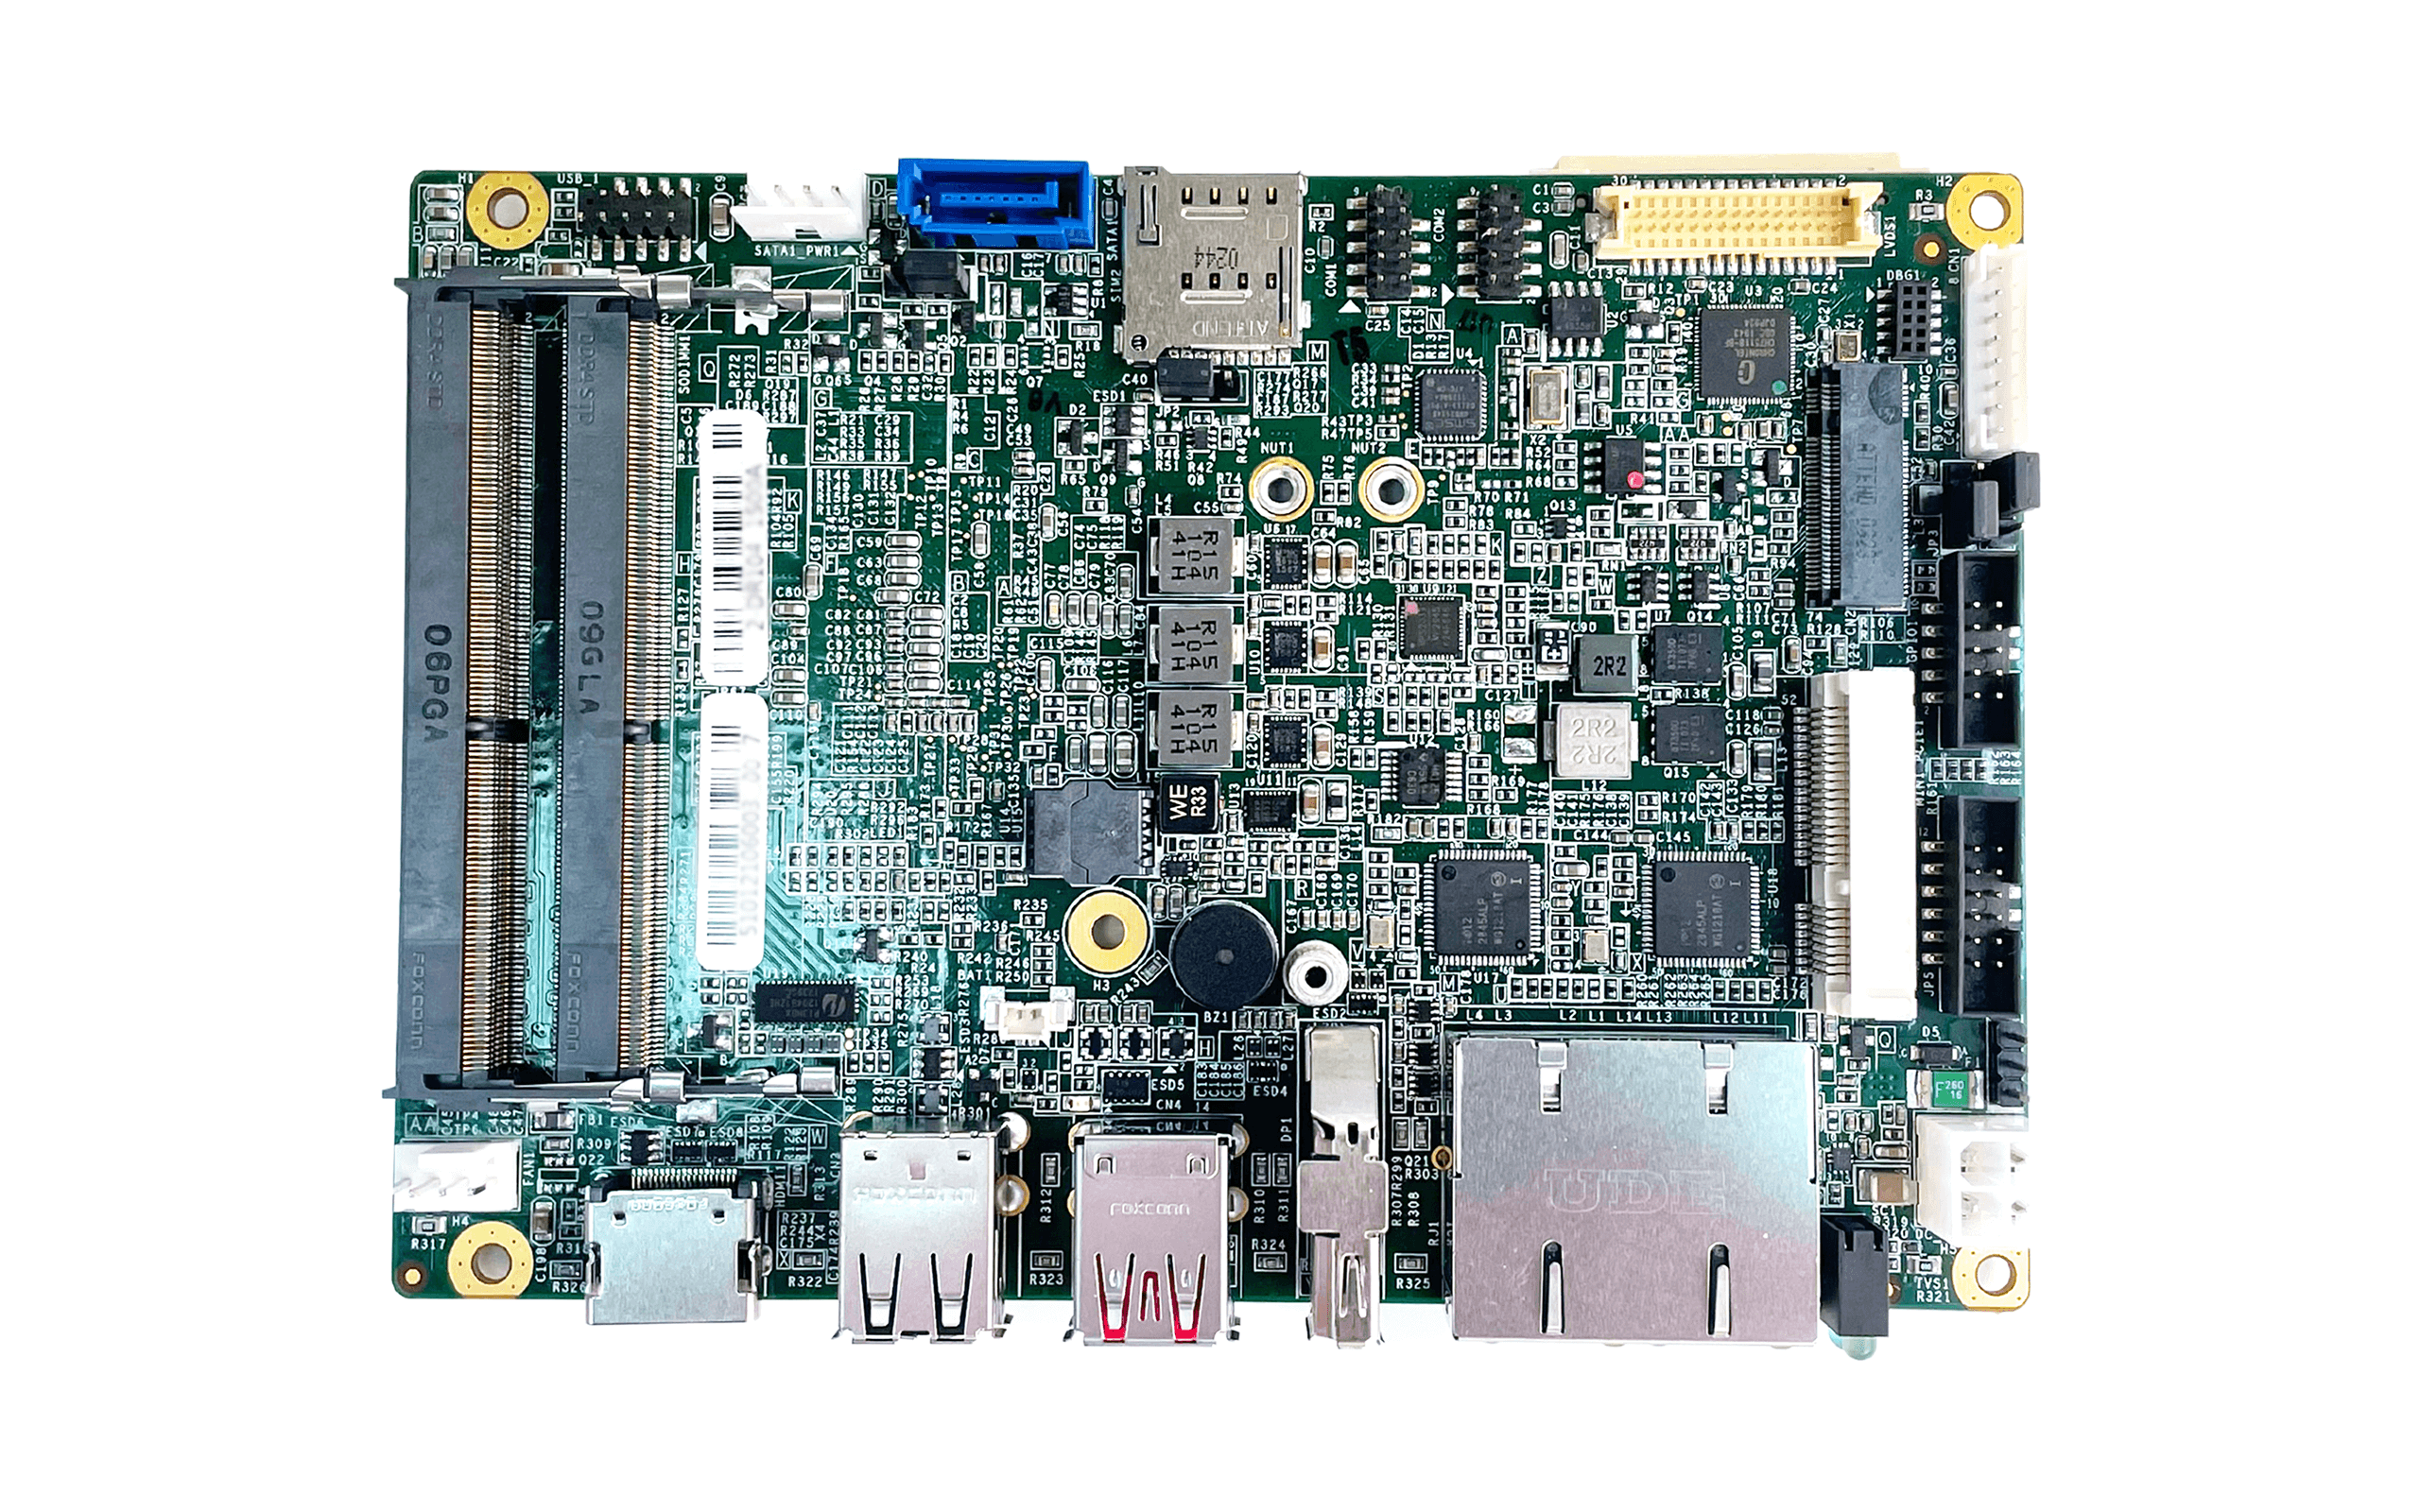 CT-DR101 3.5" SBC Industrial Motherboard with AMD Ryzen™ Embedded R1000/V1000 Series Processor